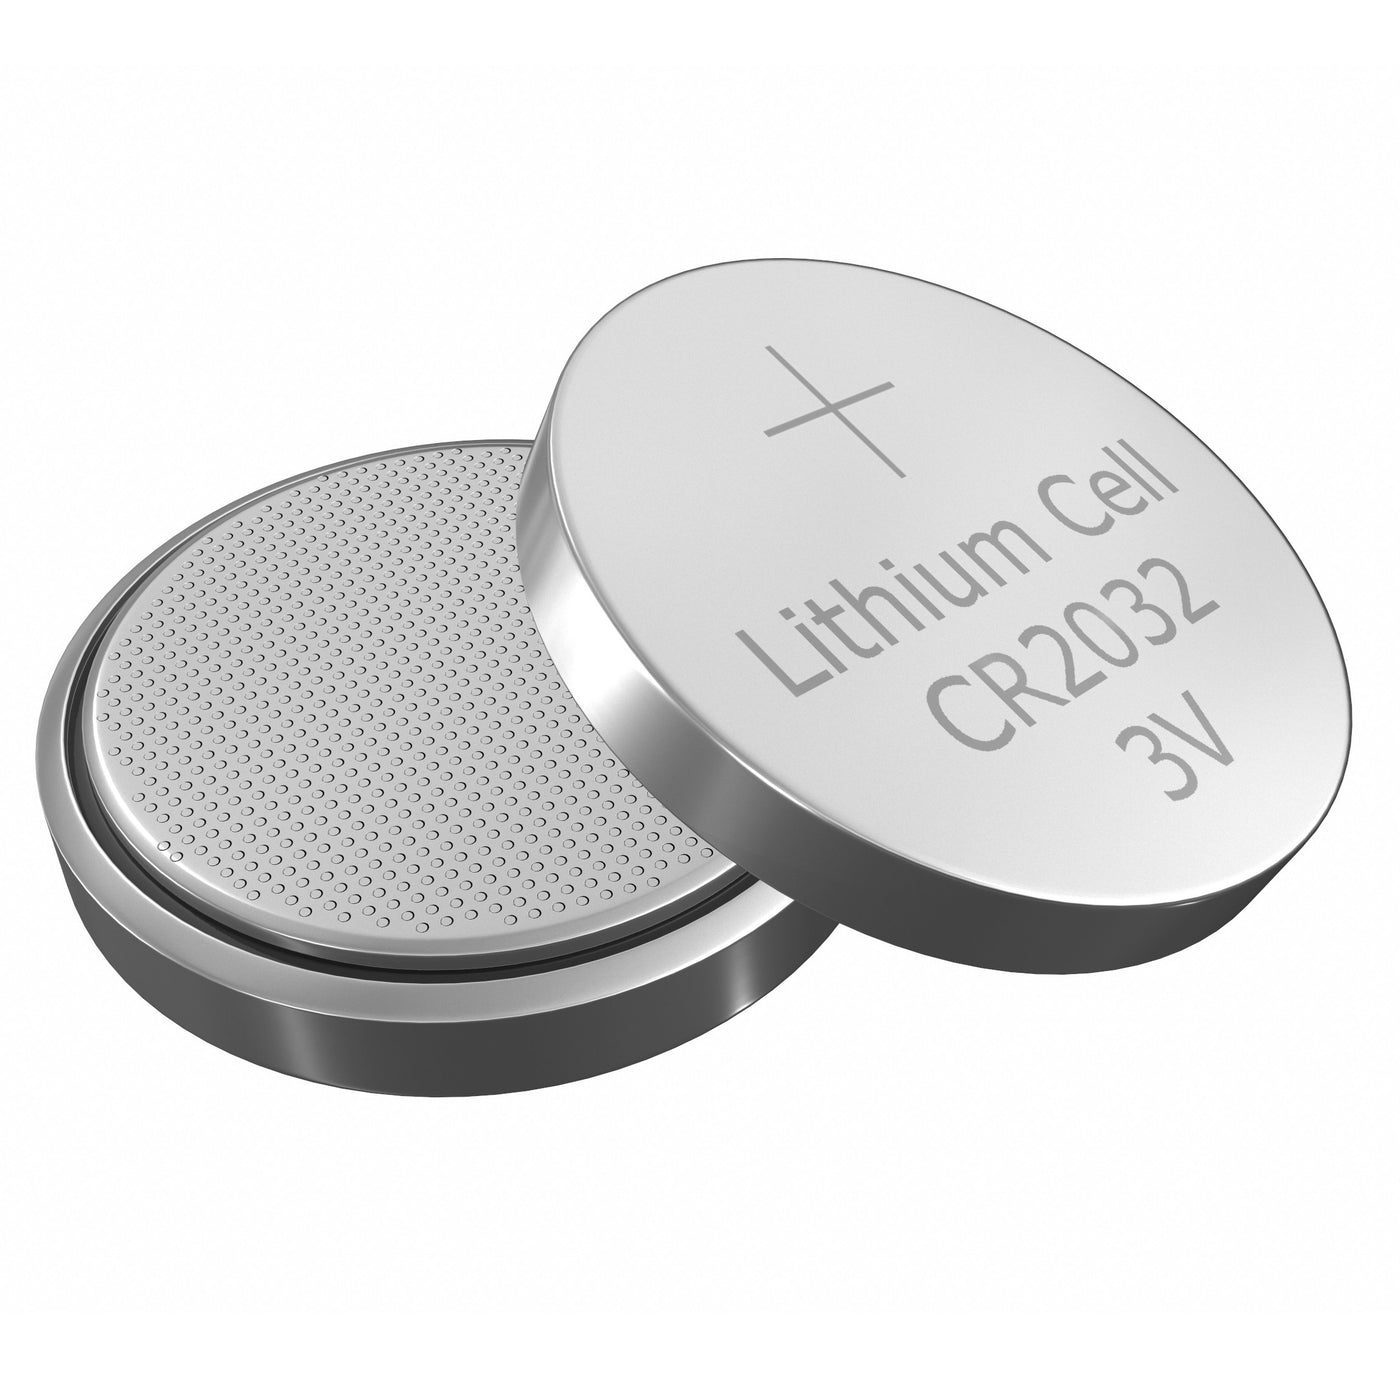 P001965 - Lithium button cell battery CR2032 3V